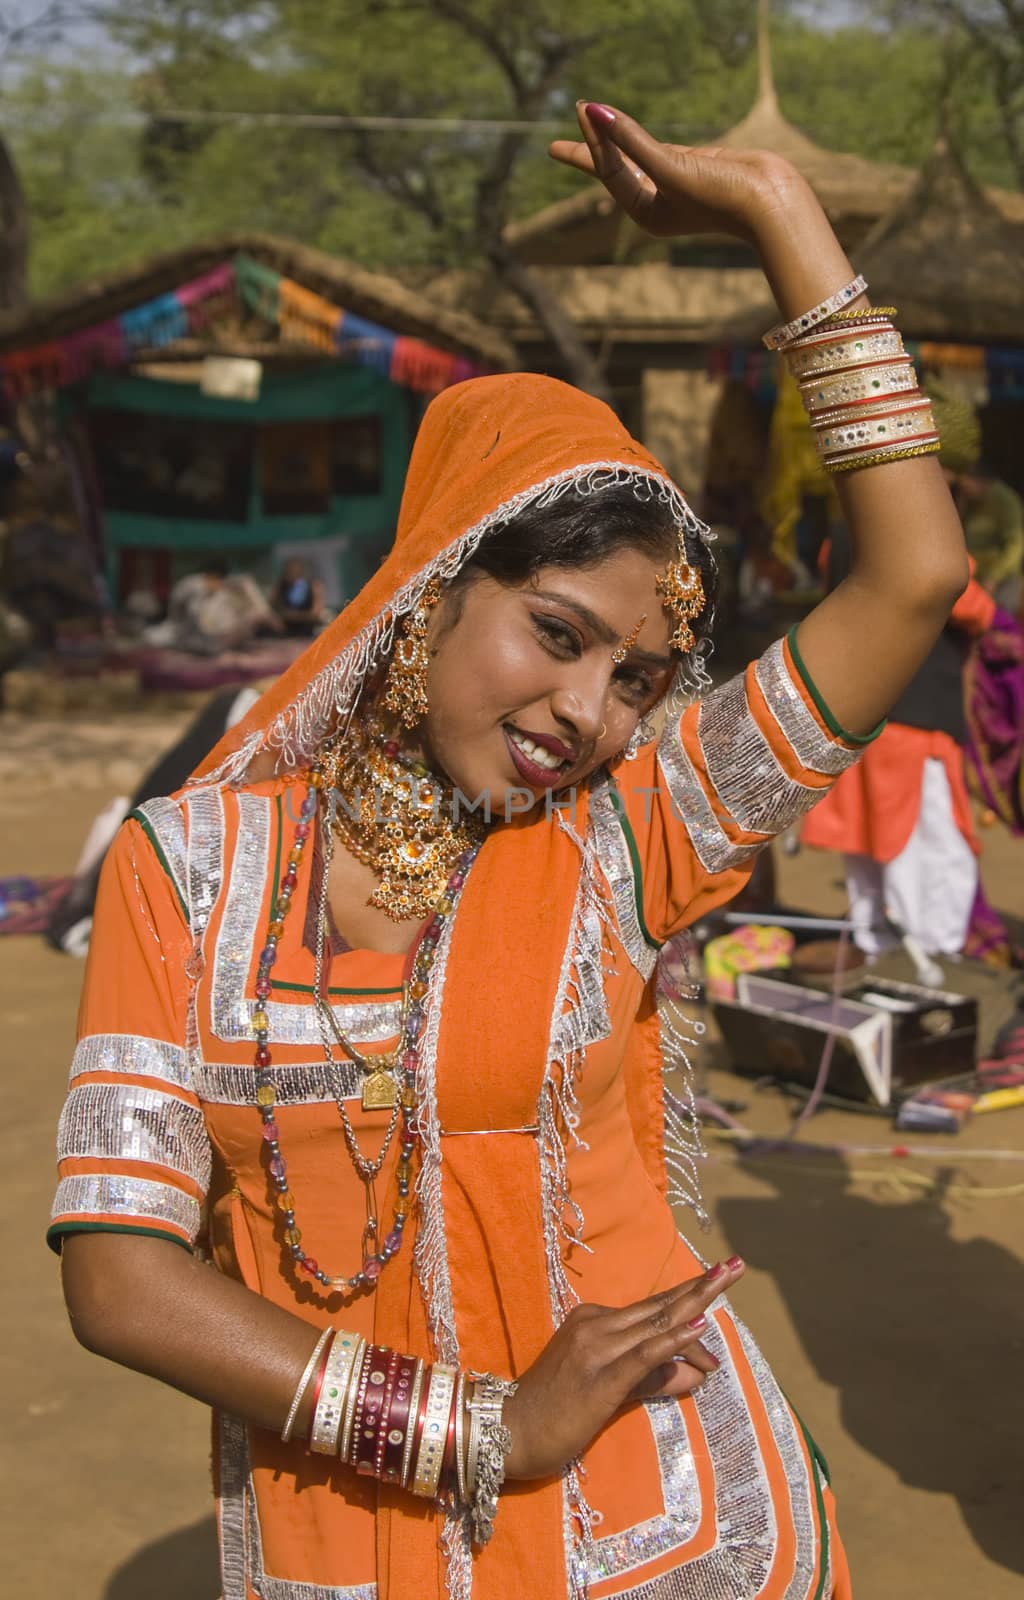 Kalbelia dancer from the Jaipur area of Rajasthan performing at the annual Sarujkund Fair on the outskirts of Delhi, India